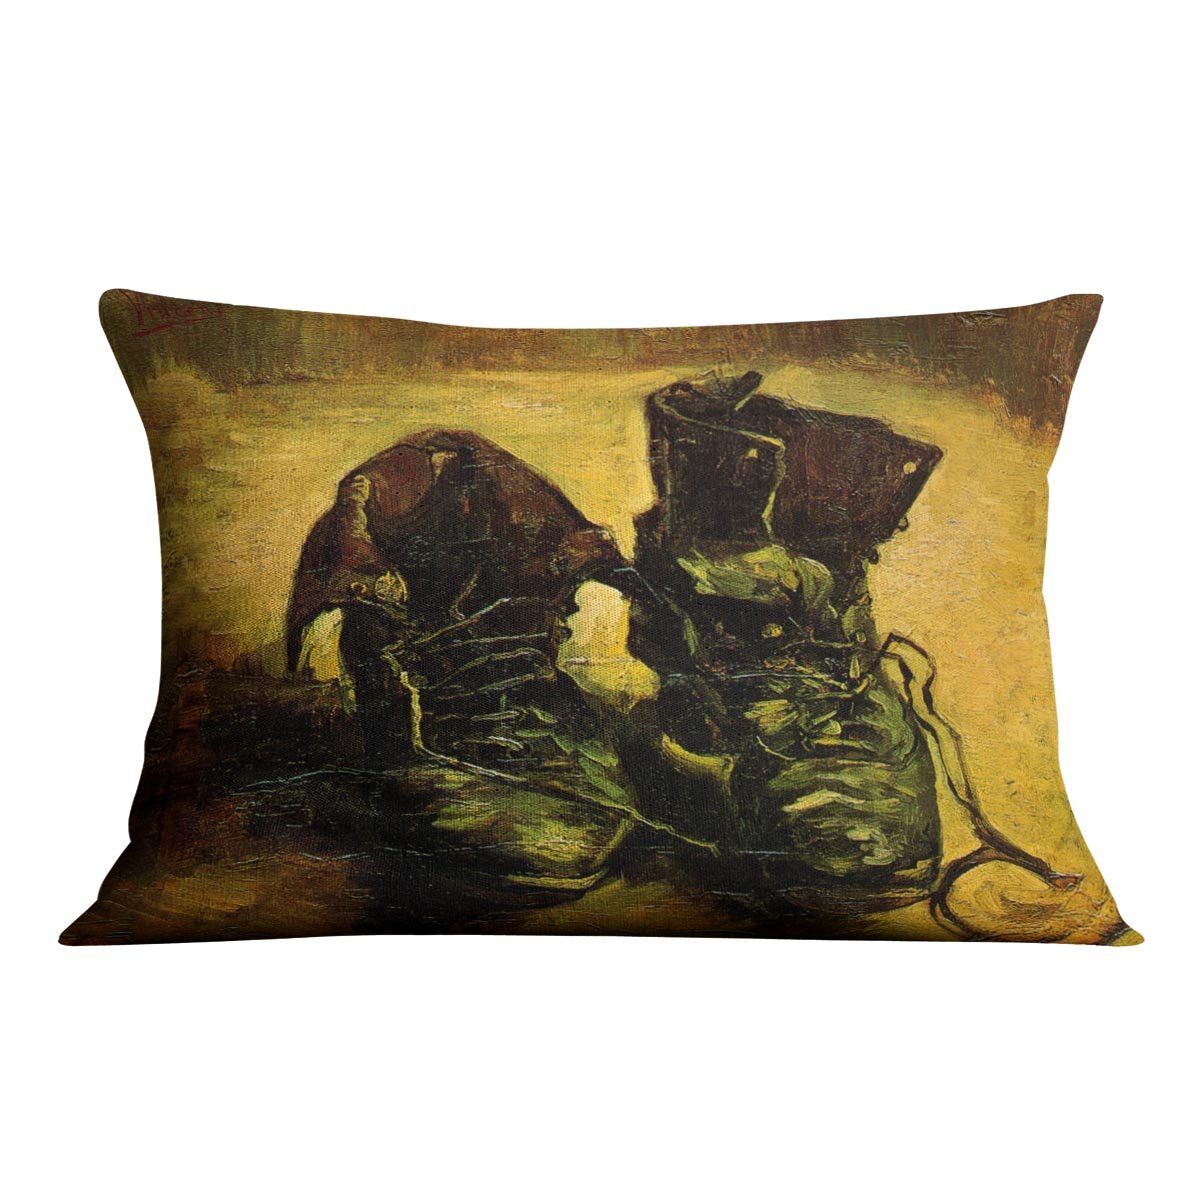 A Pair of Shoes 2 by Van Gogh Throw Pillow